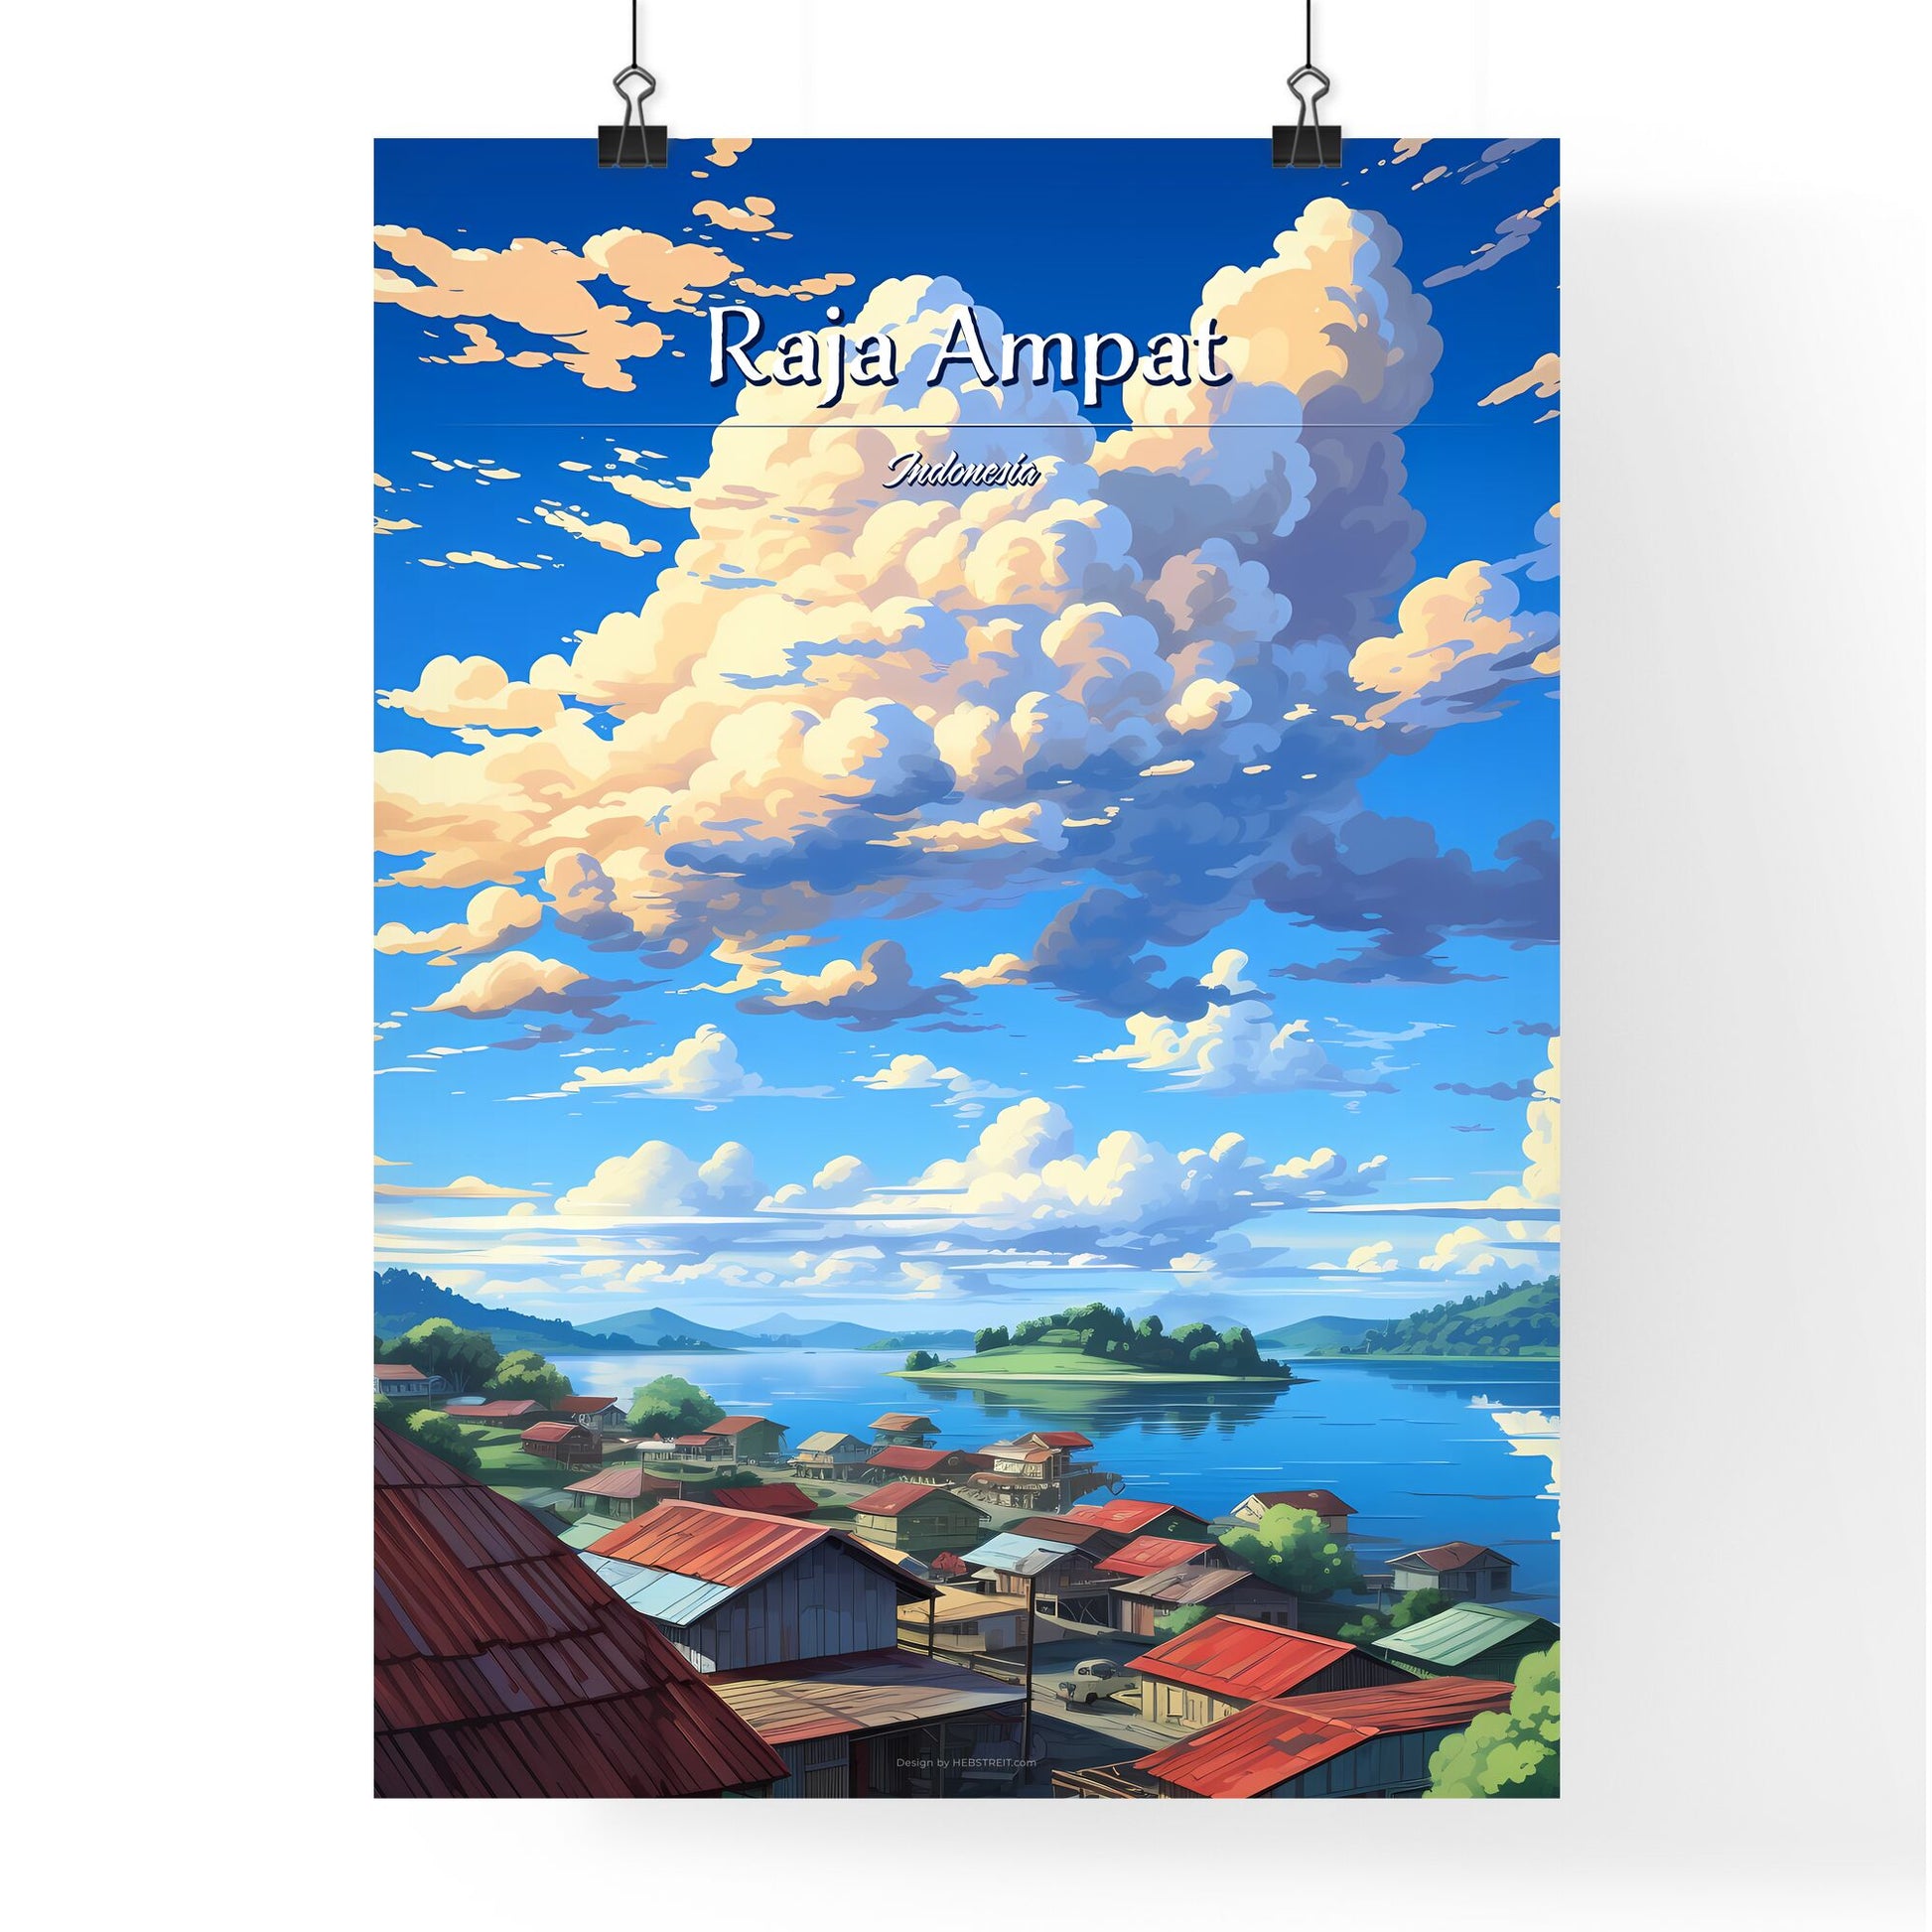 On the roofs of Raja Ampat, Indonesia - Art print of a landscape of a village with a body of water and clouds Default Title